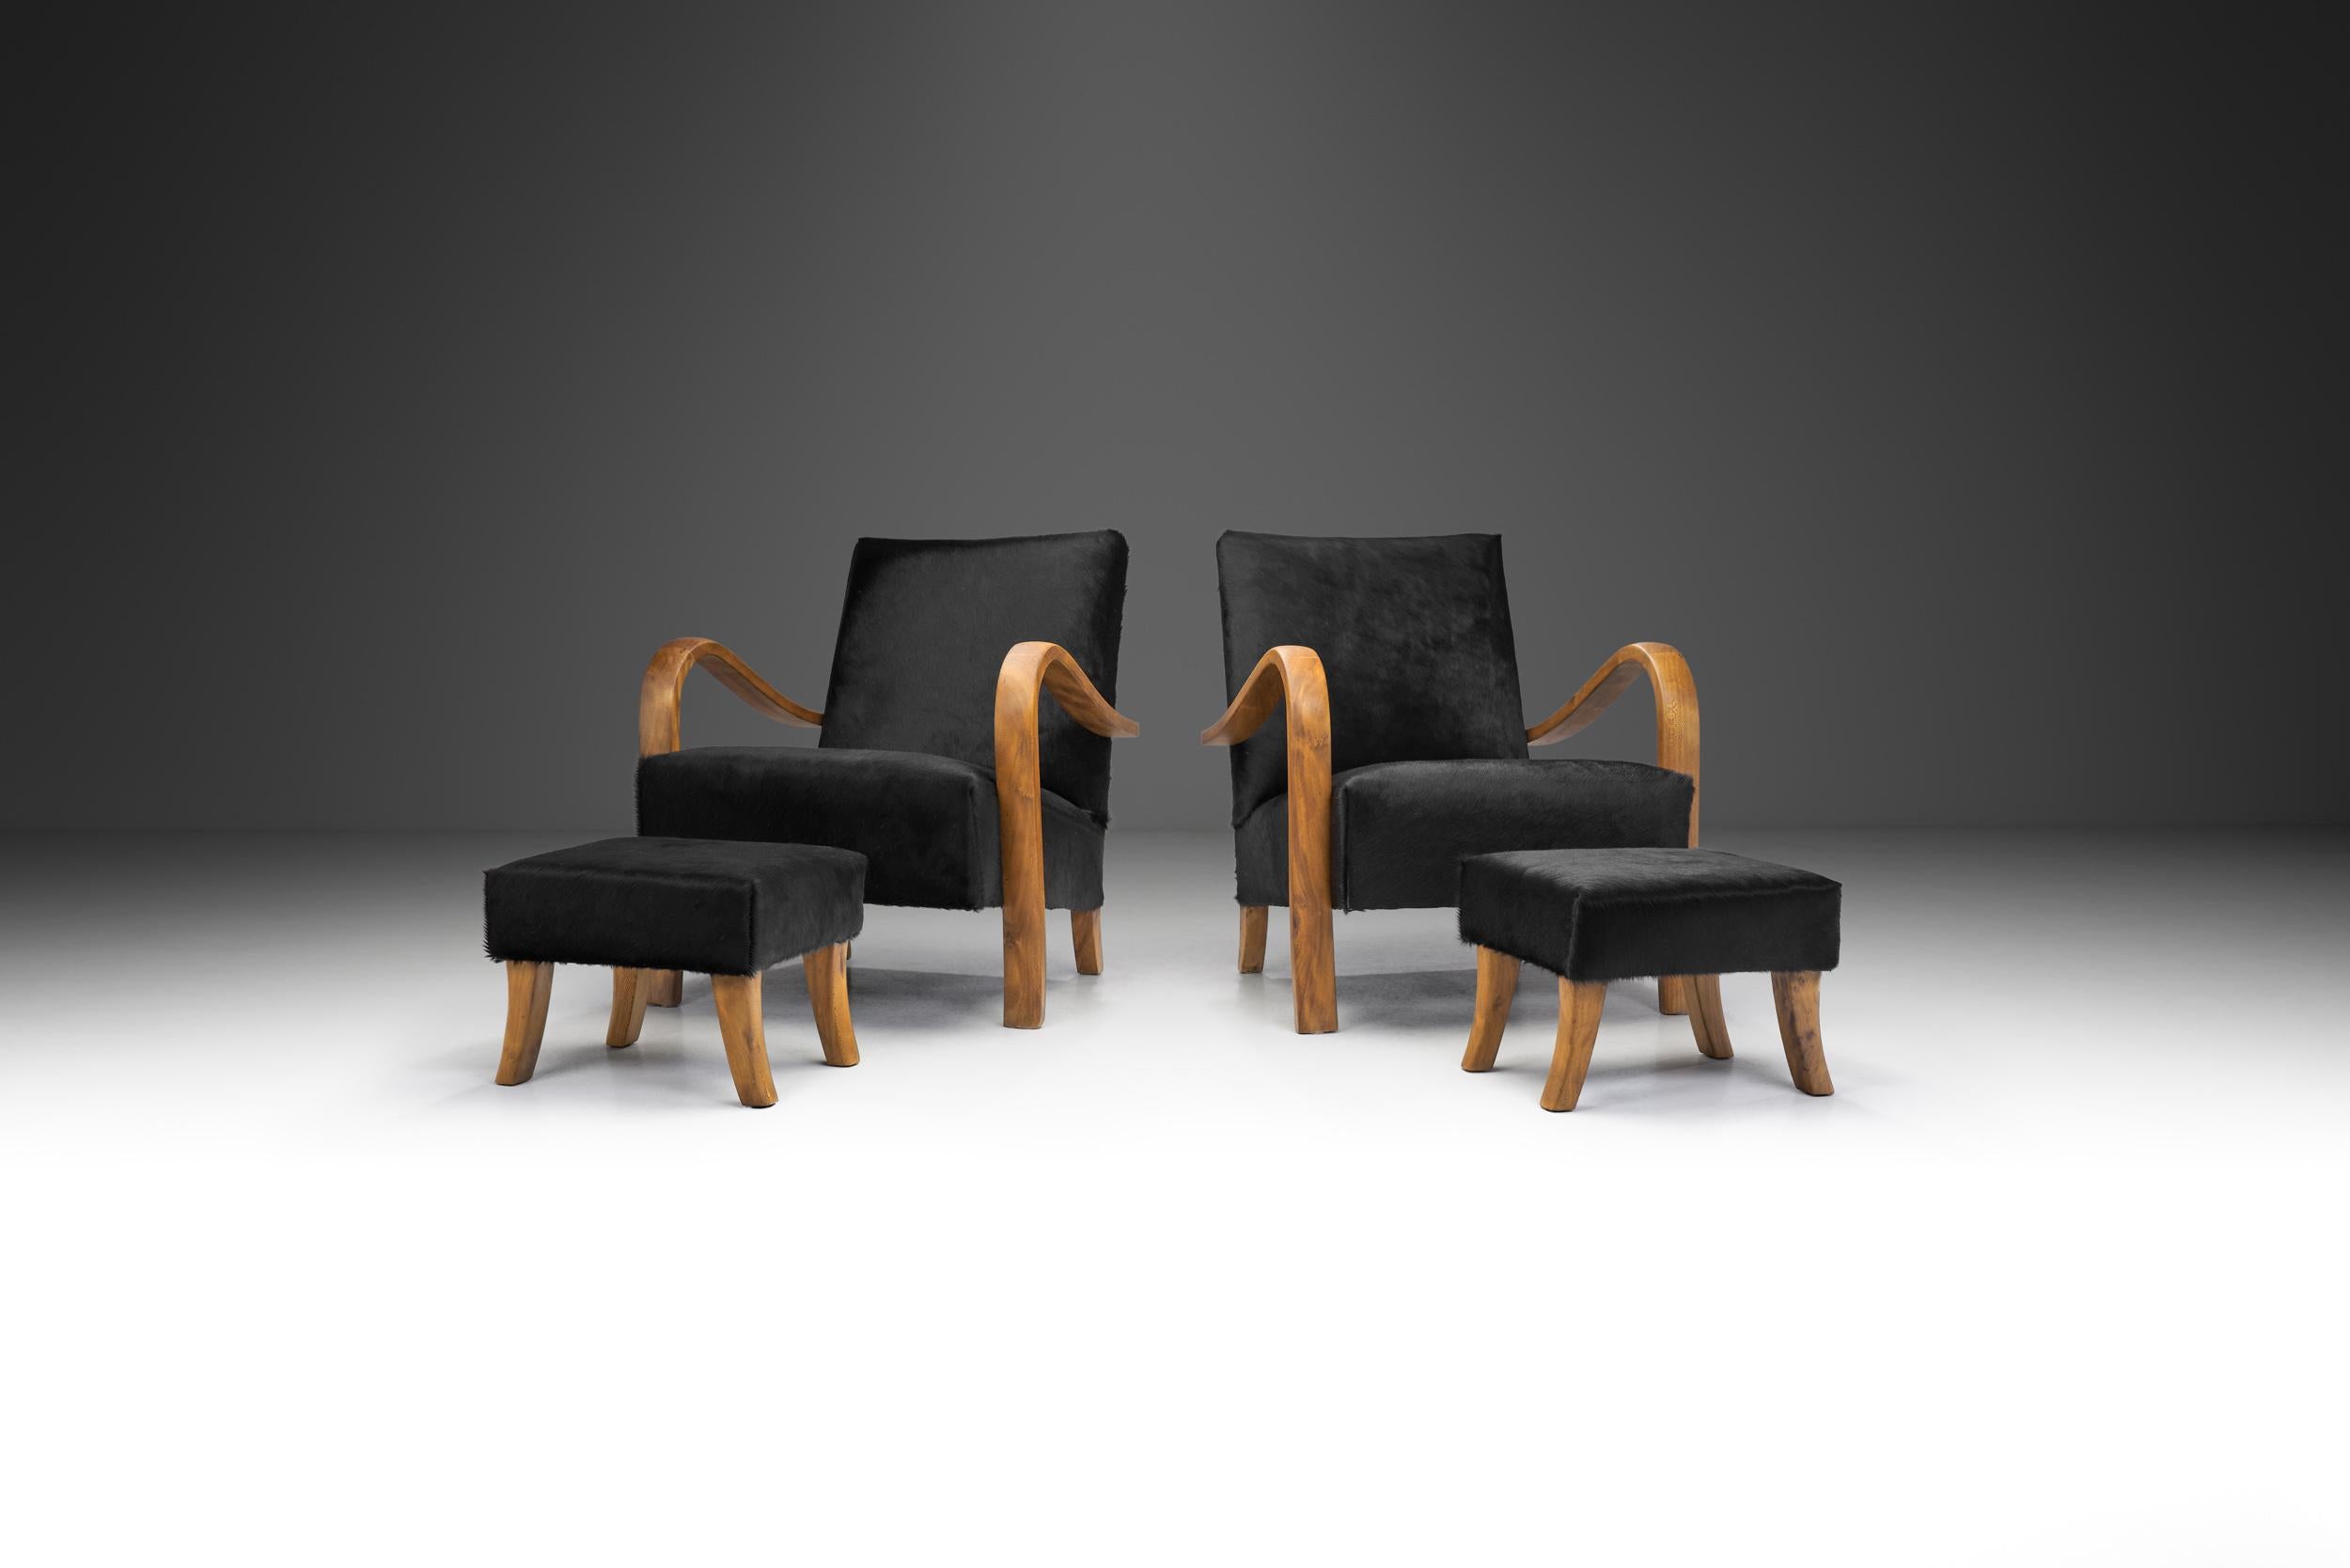 Crafted in Italy during the 1950s, this pair of Italian cherry wood lounge chairs with foot stools embodies the essence of mid-century modern design, seamlessly blending organic elegance with functional comfort. These chairs stand as timeless